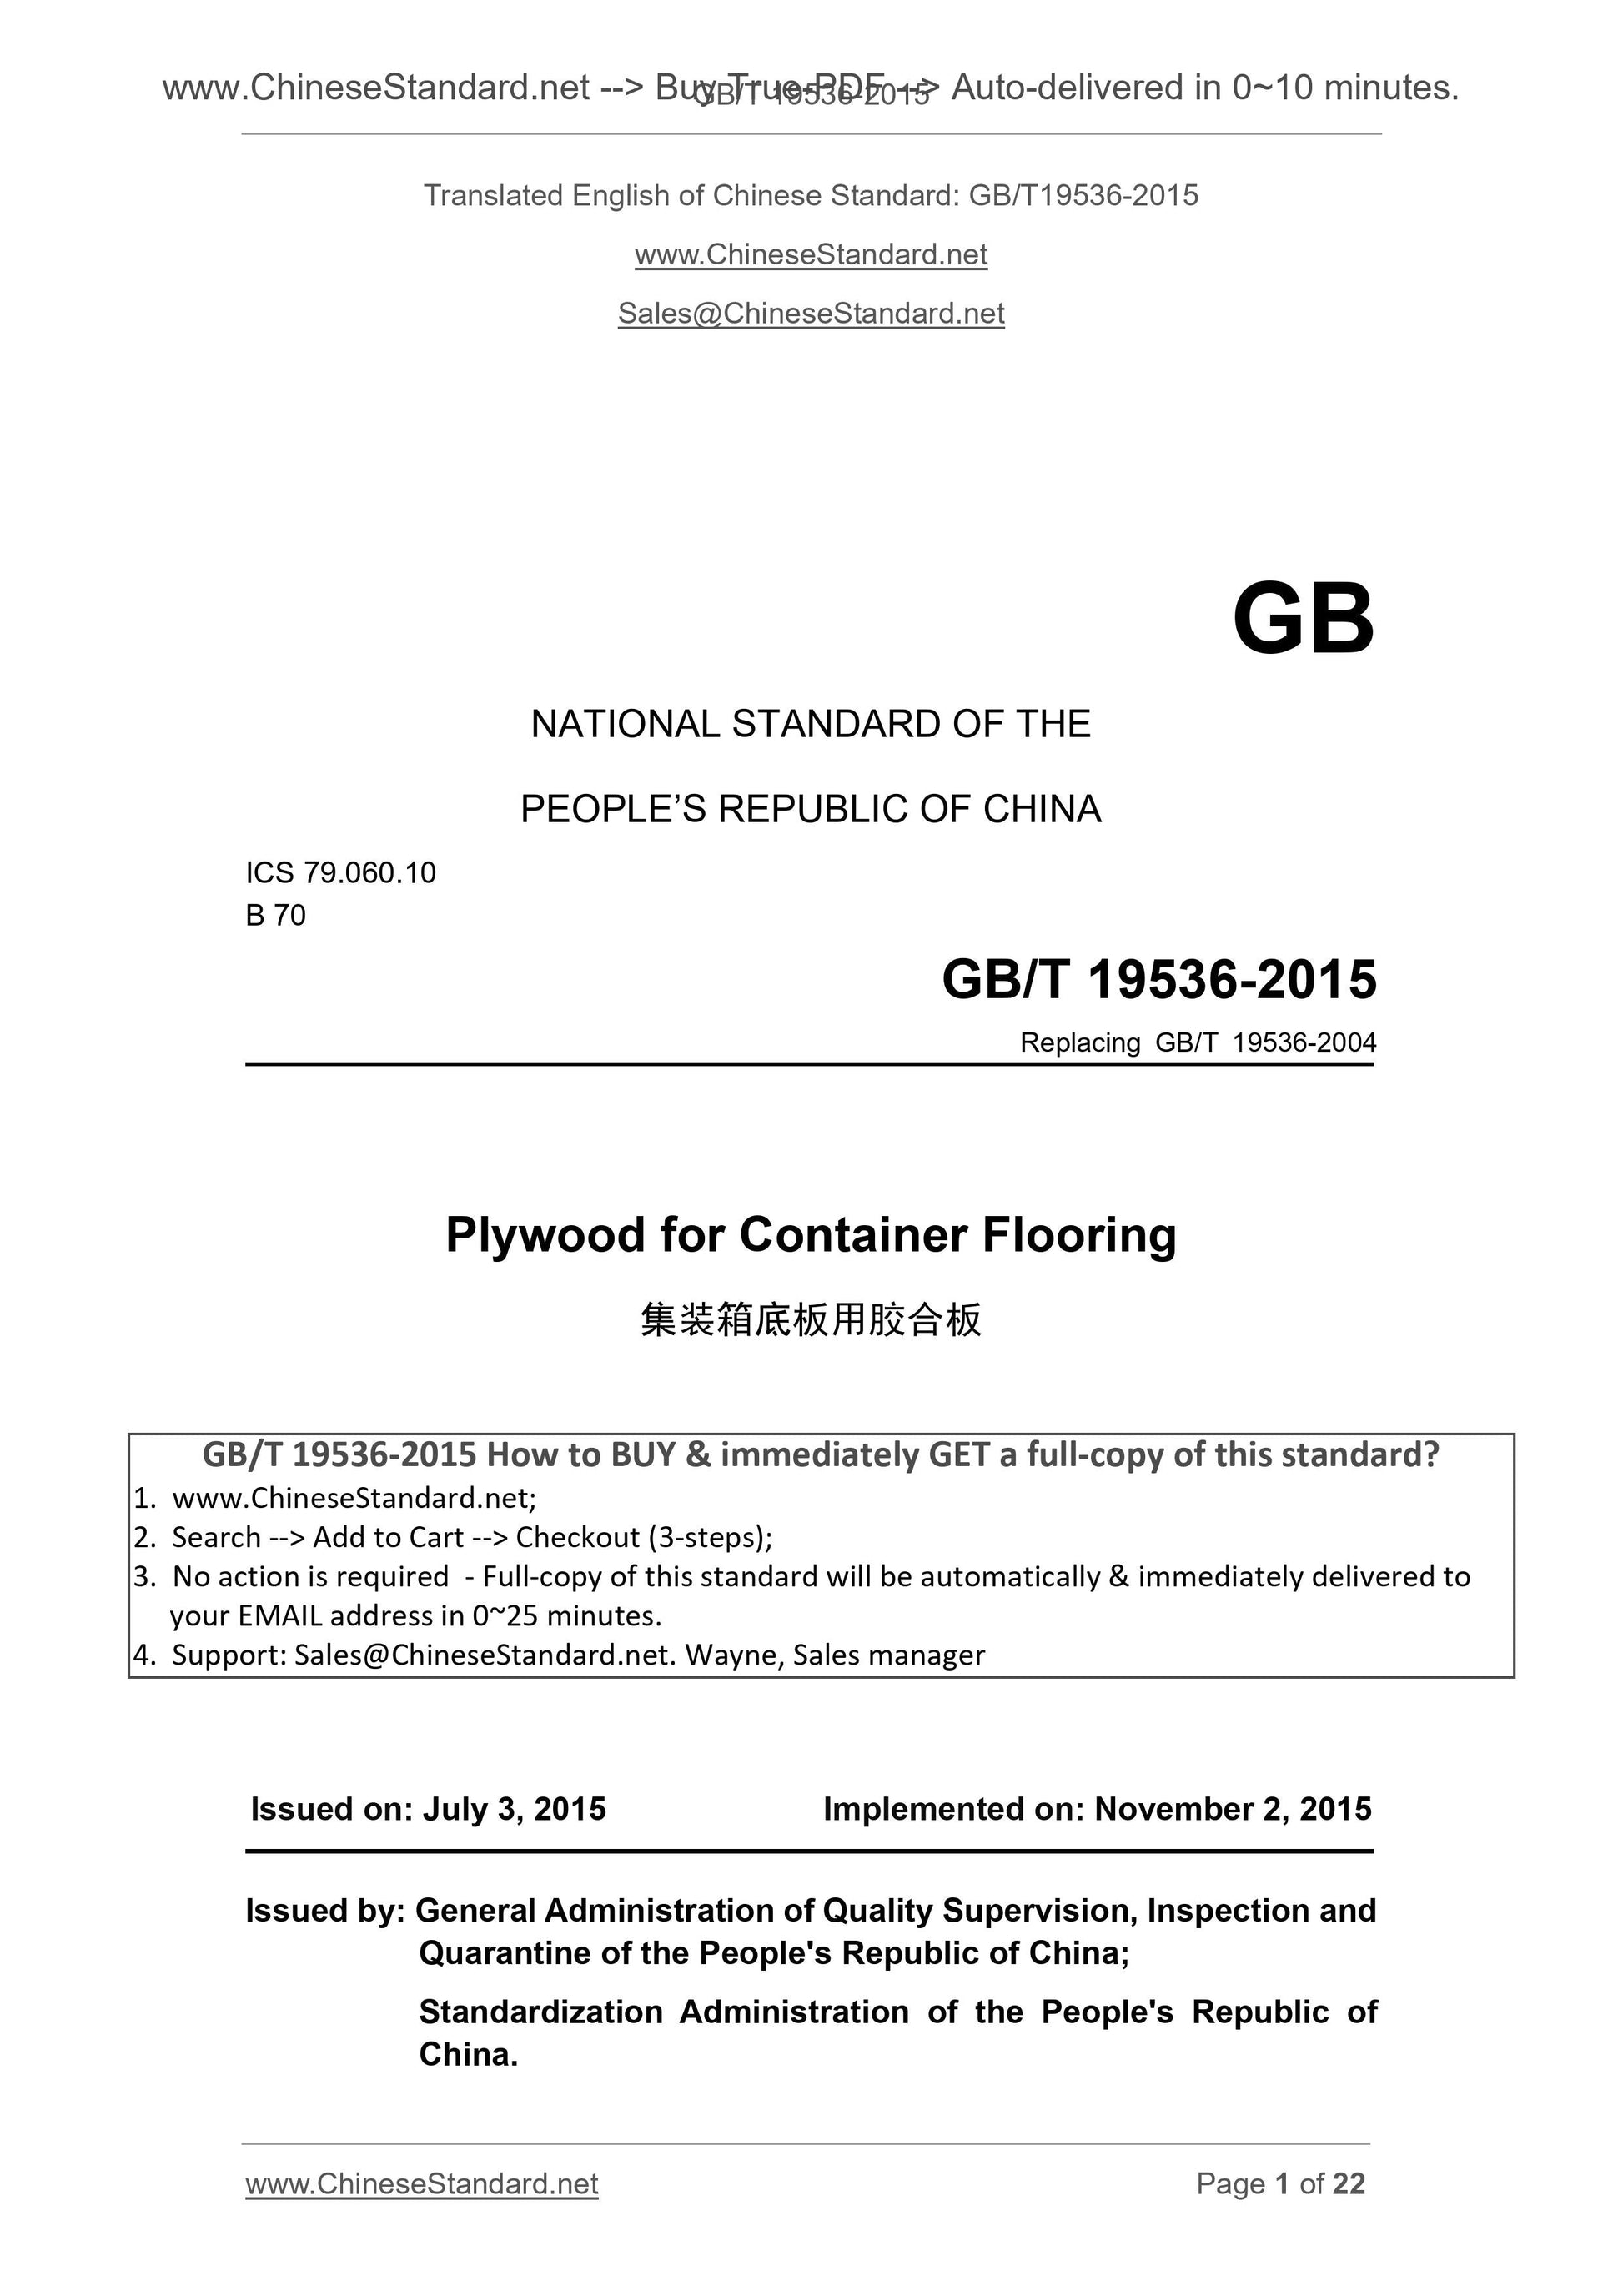 GB/T 19536-2015 Page 1